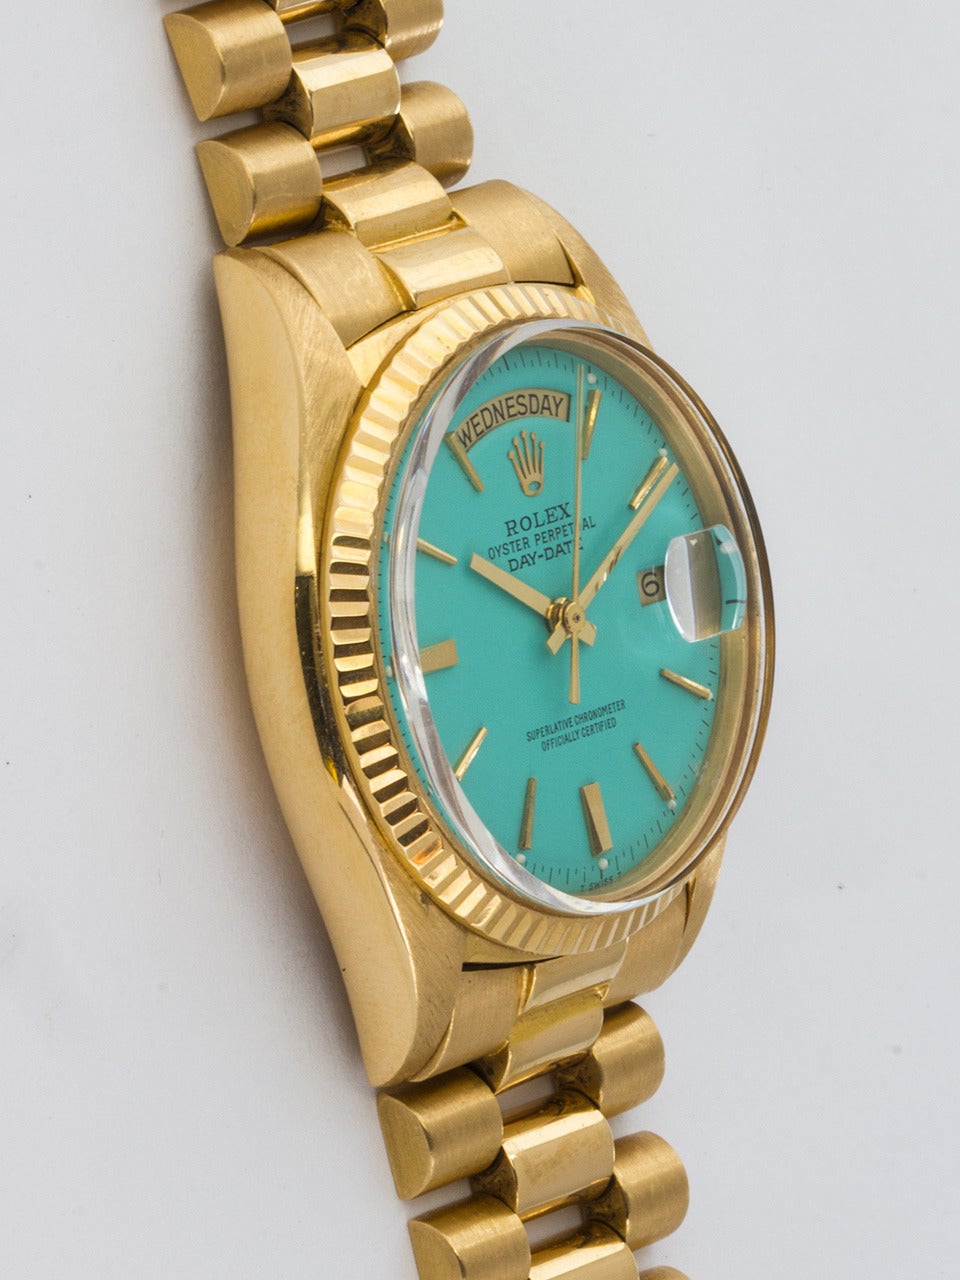 Rolex 18K Yellow Gold Day-Date President Wristwatch ref 1803 serial# 2.7 million circa 1971. Full size man's model, 36mm diameter Oyster case with fluted bezel and acrylic crystal. Featuring one of our most popular custom colored dial, Tiffany & Co